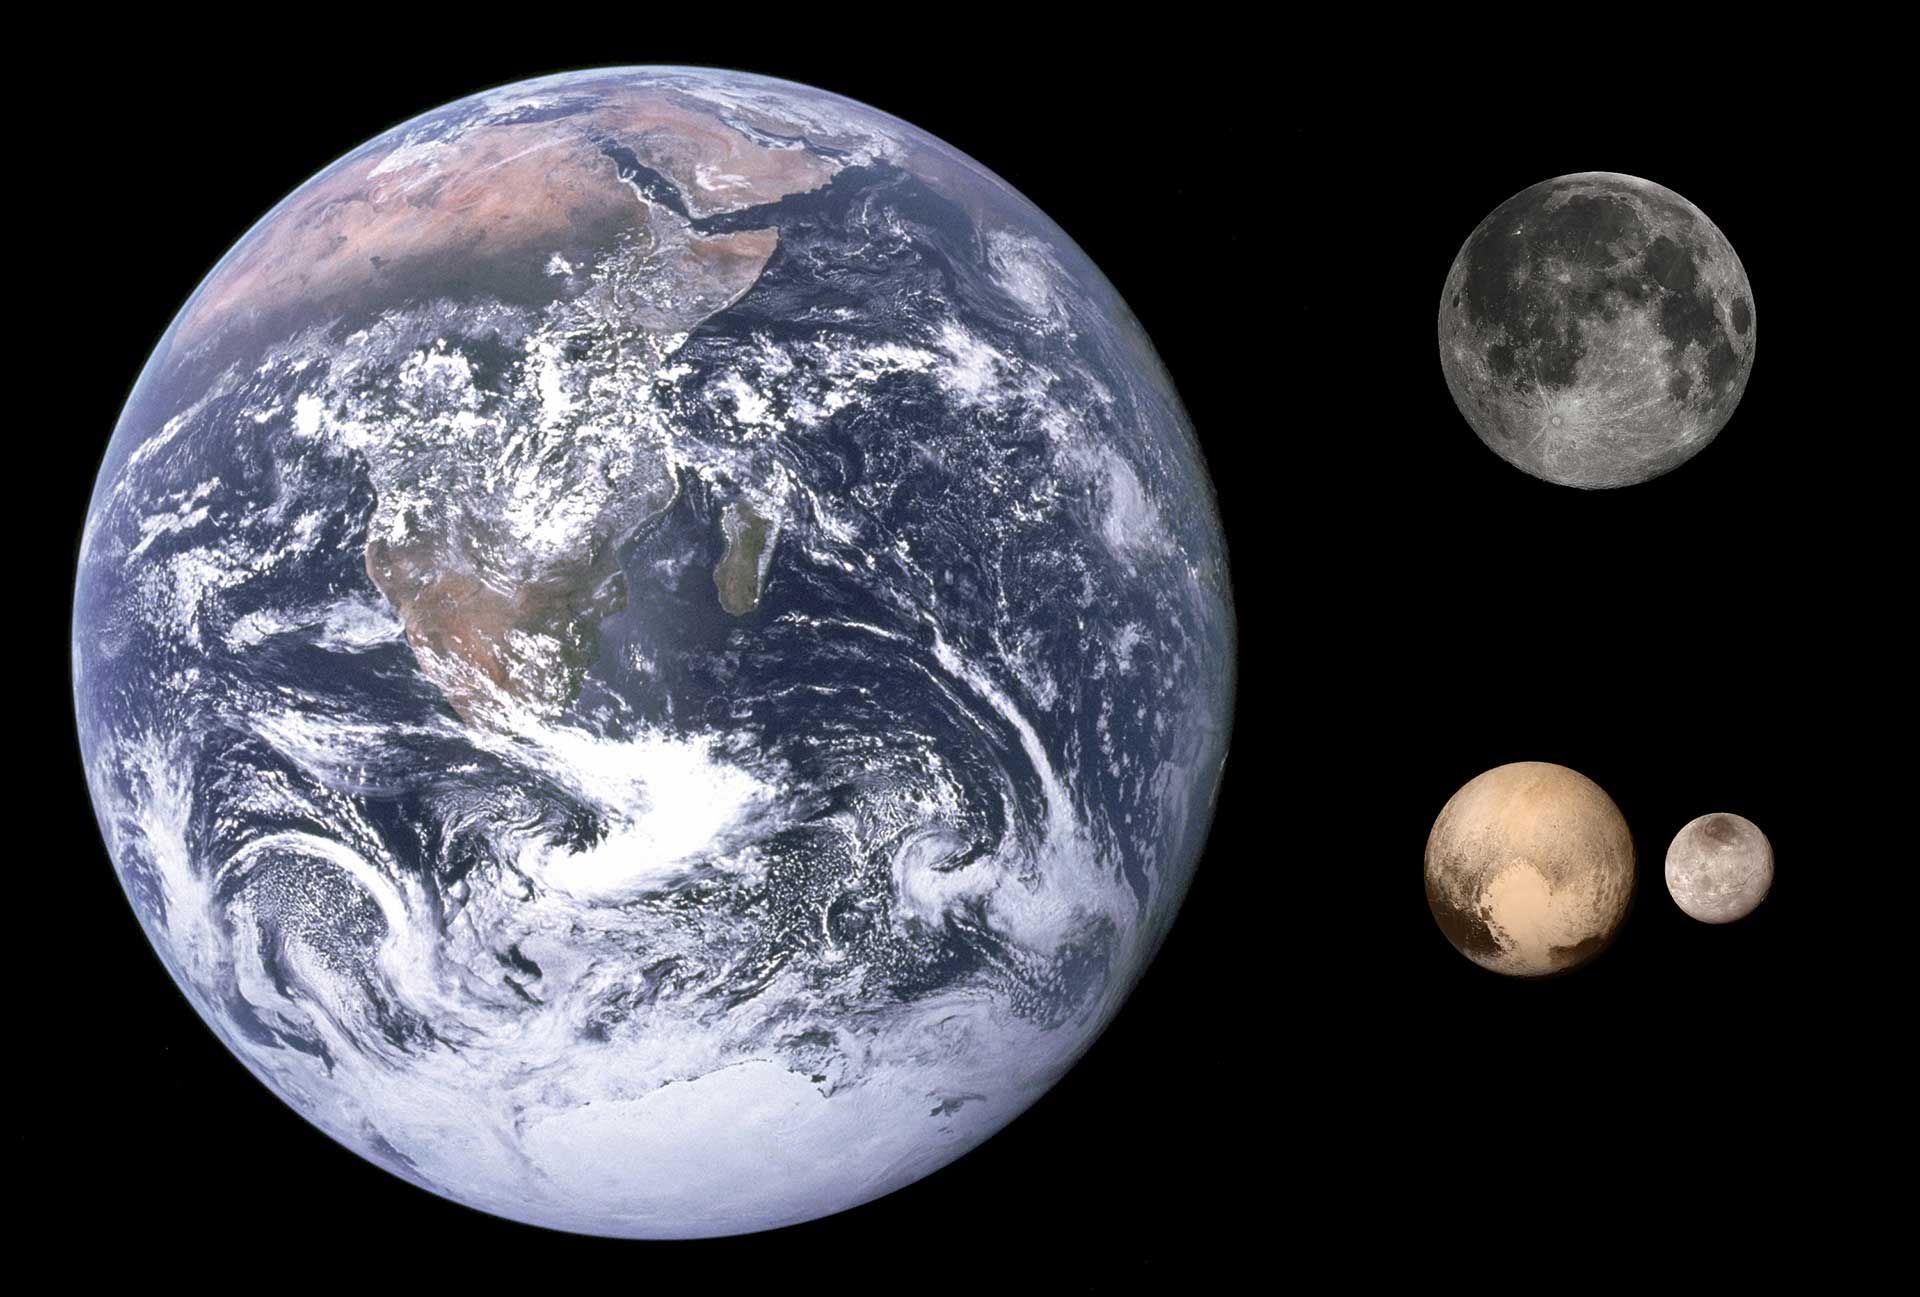 Comparing the size of Earth and Moon with Pluto and Charon